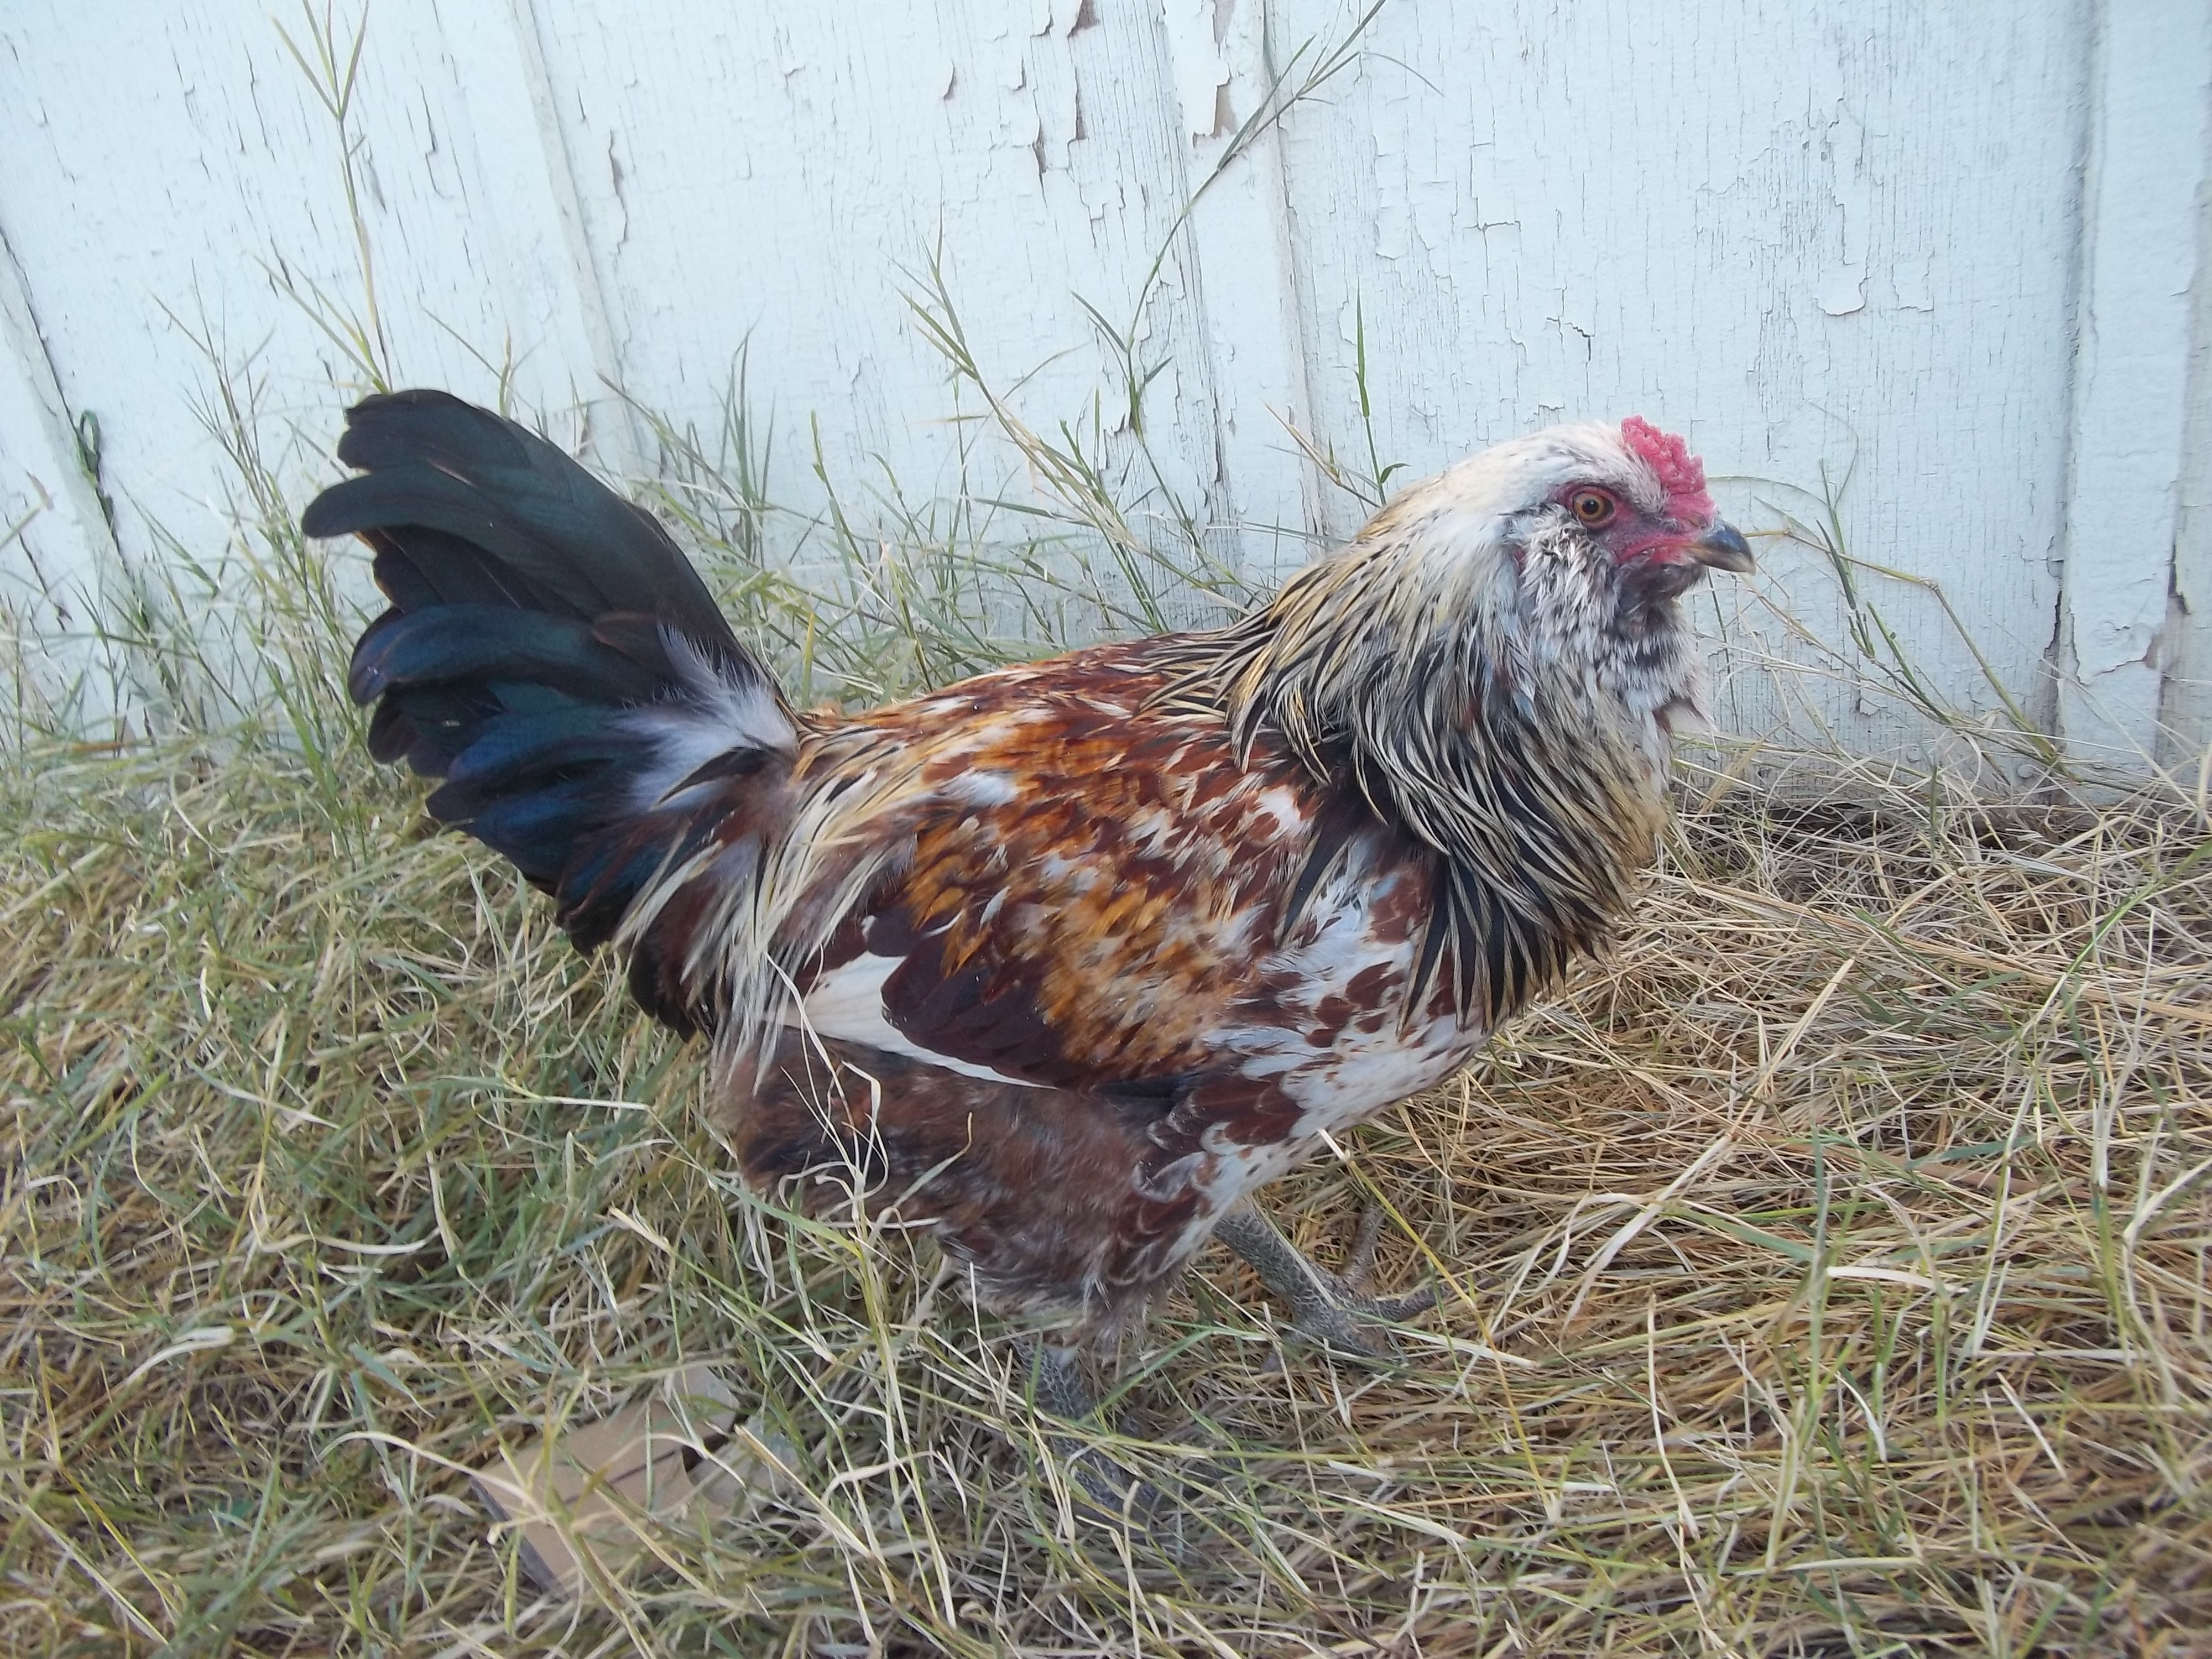 Our Easter Egger Rooster. He is going to a new home soon.